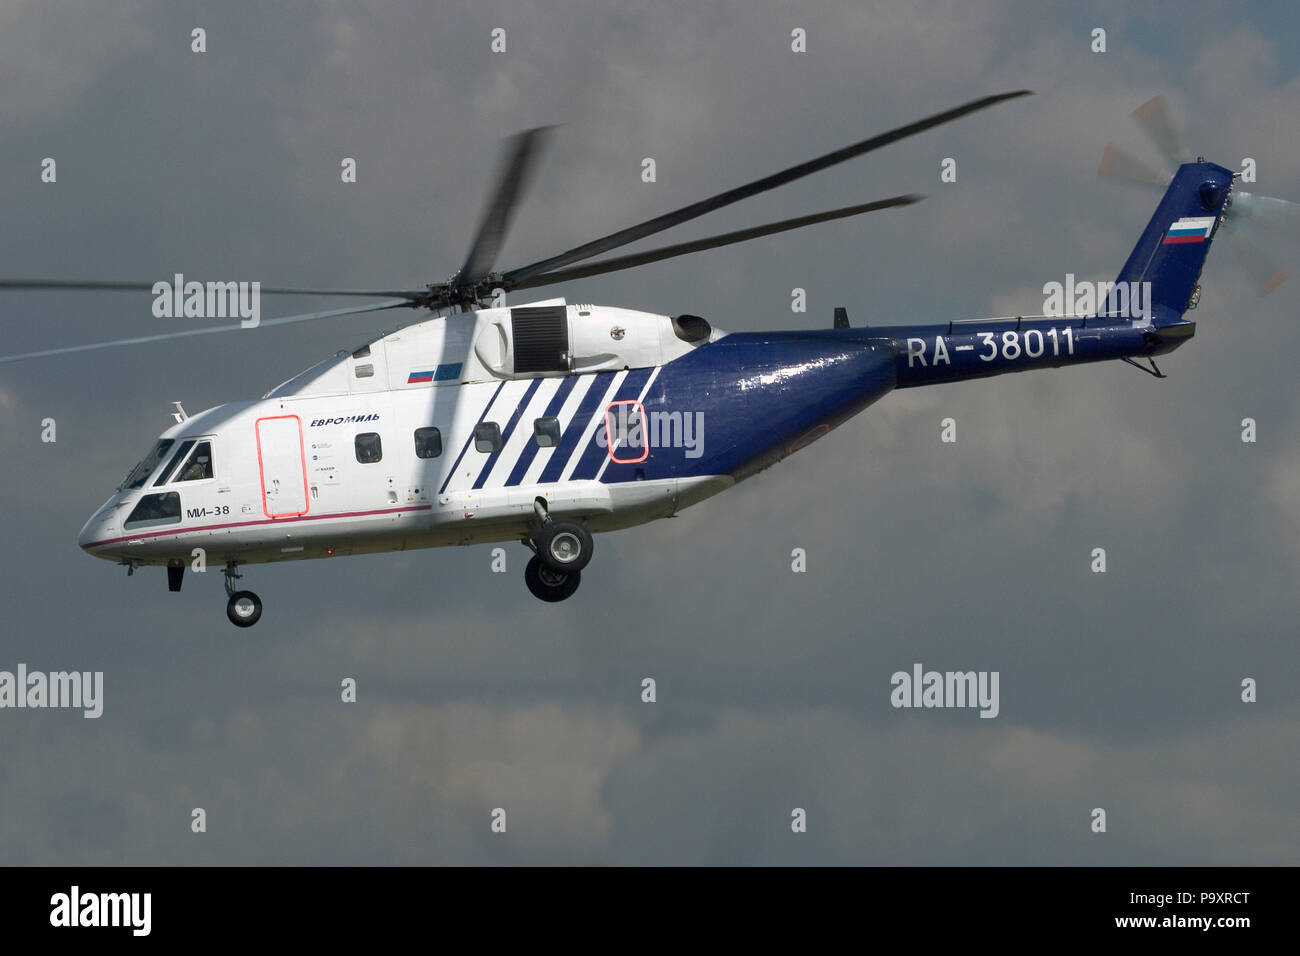 The first flying prototype of the Mil Mi-38 helicopter designed to replace ageing fleet of Mil Mi-8 helicopters, takes part in MAKS-2007 airshow, Zhuk Stock Photo